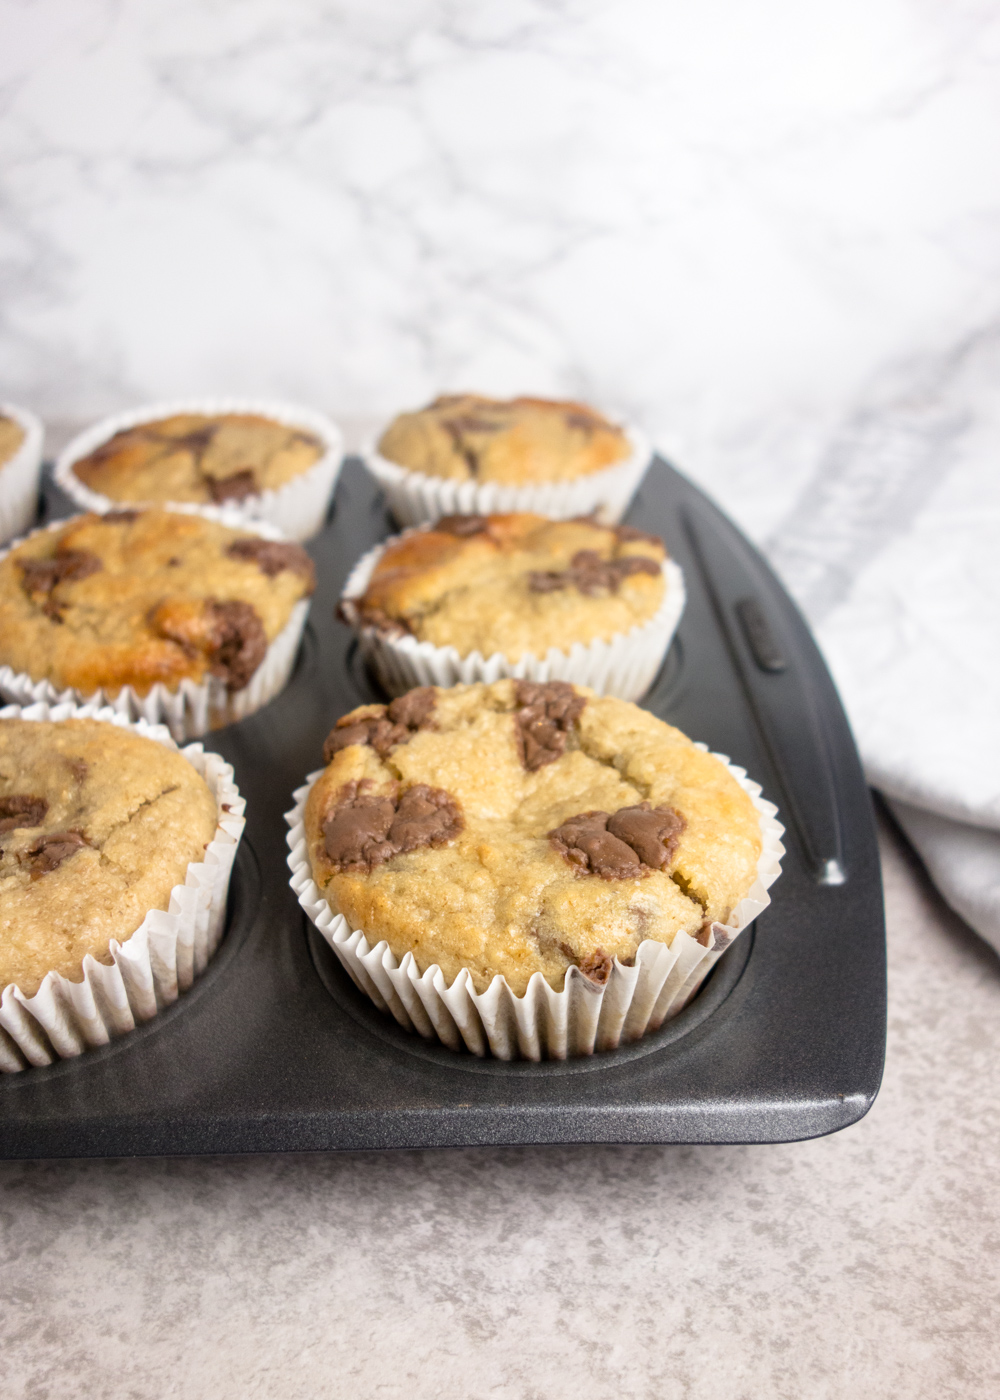 Choc Chip Banana Oat Muffins: Light & fluffy muffins made with bananas, oats, greek yoghurt & honey (plus chocolate for good measure!)